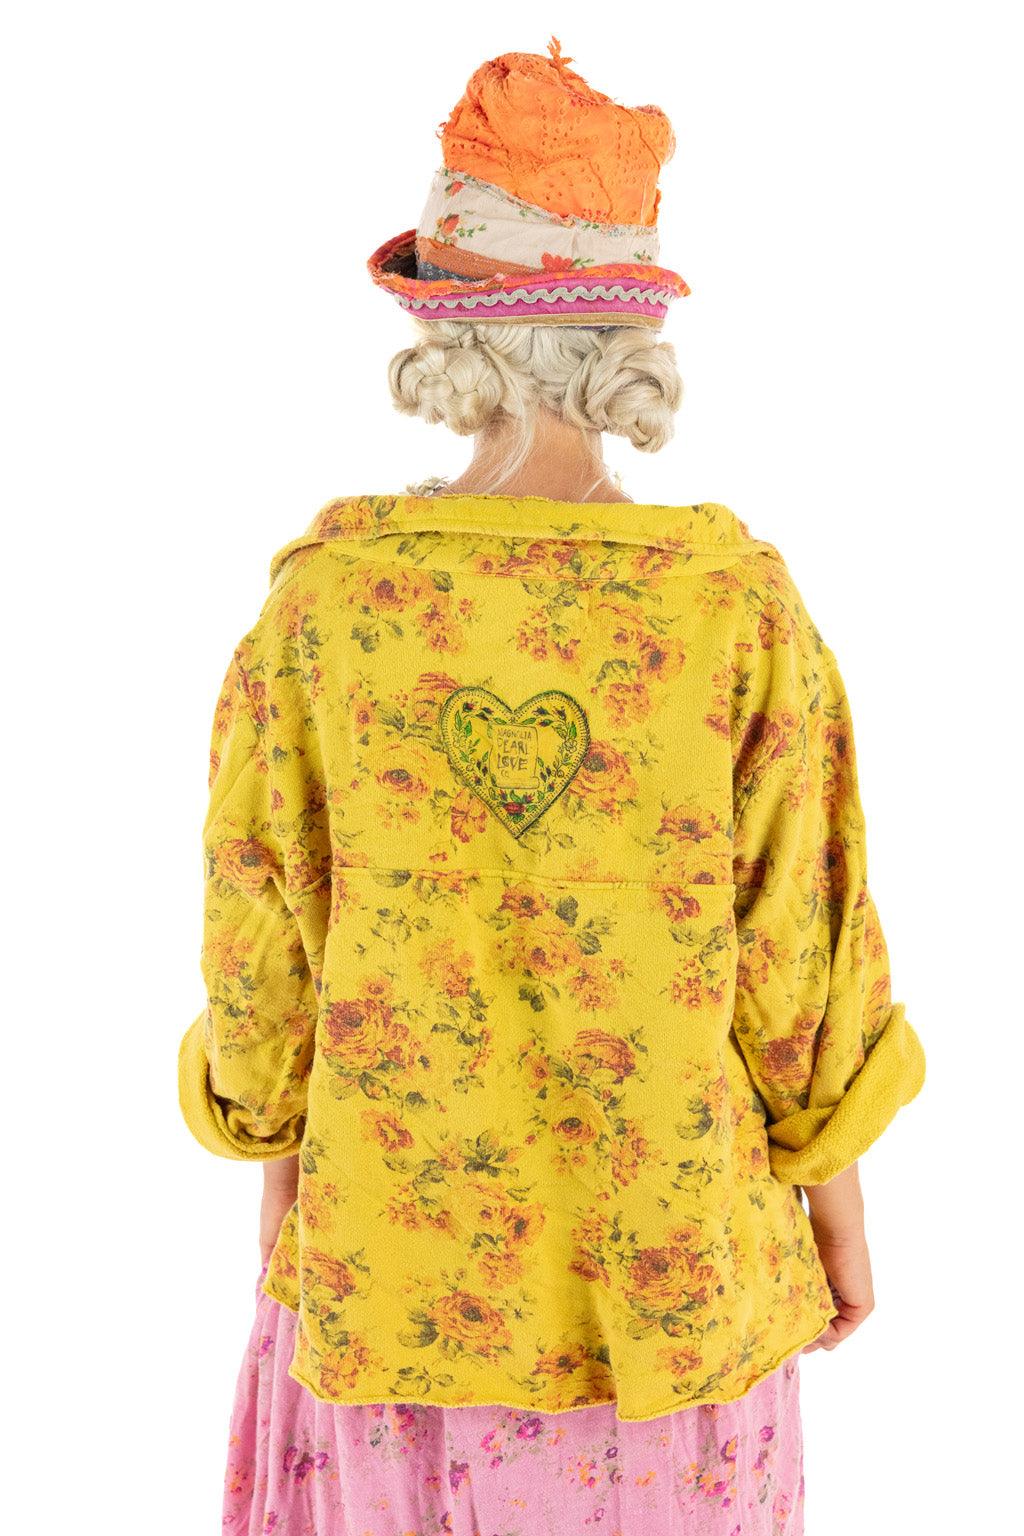 Floral Asher Pullover - Magnolia Pearl Clothing